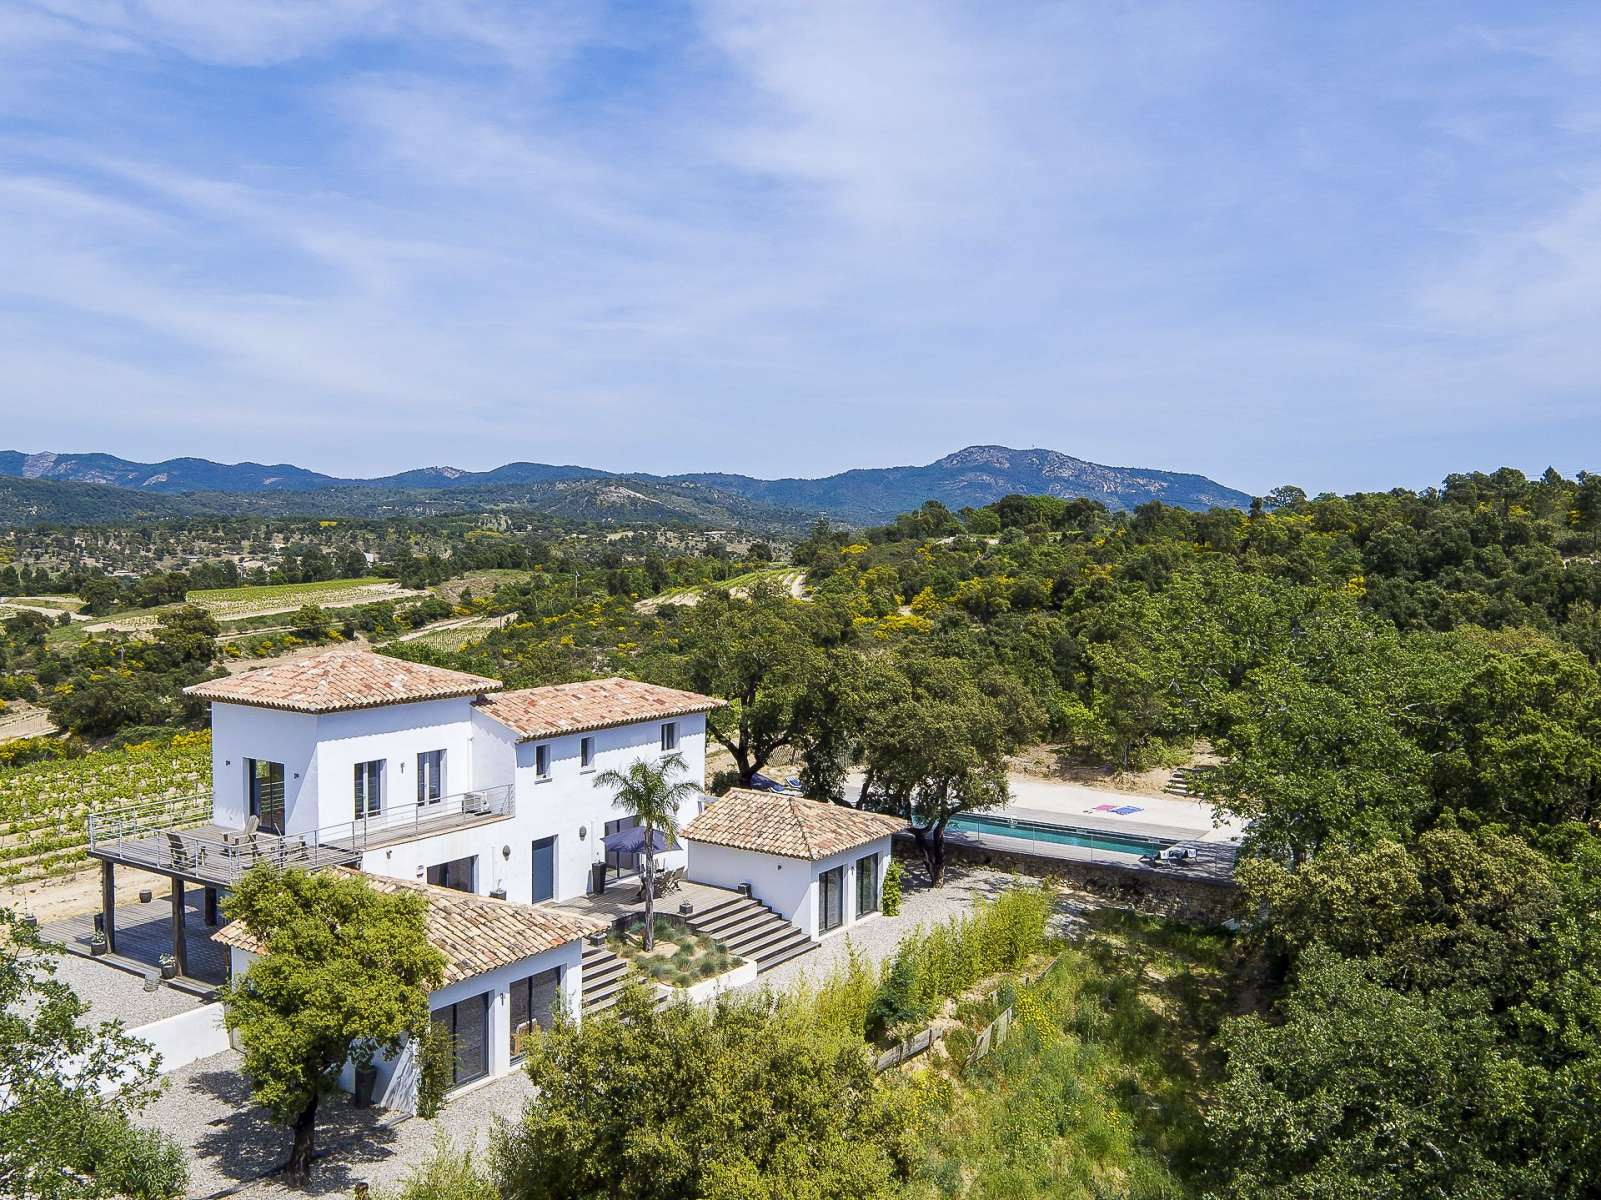 Villa by vineyards in an hour driving from Saint-Tropez offering beautiful views